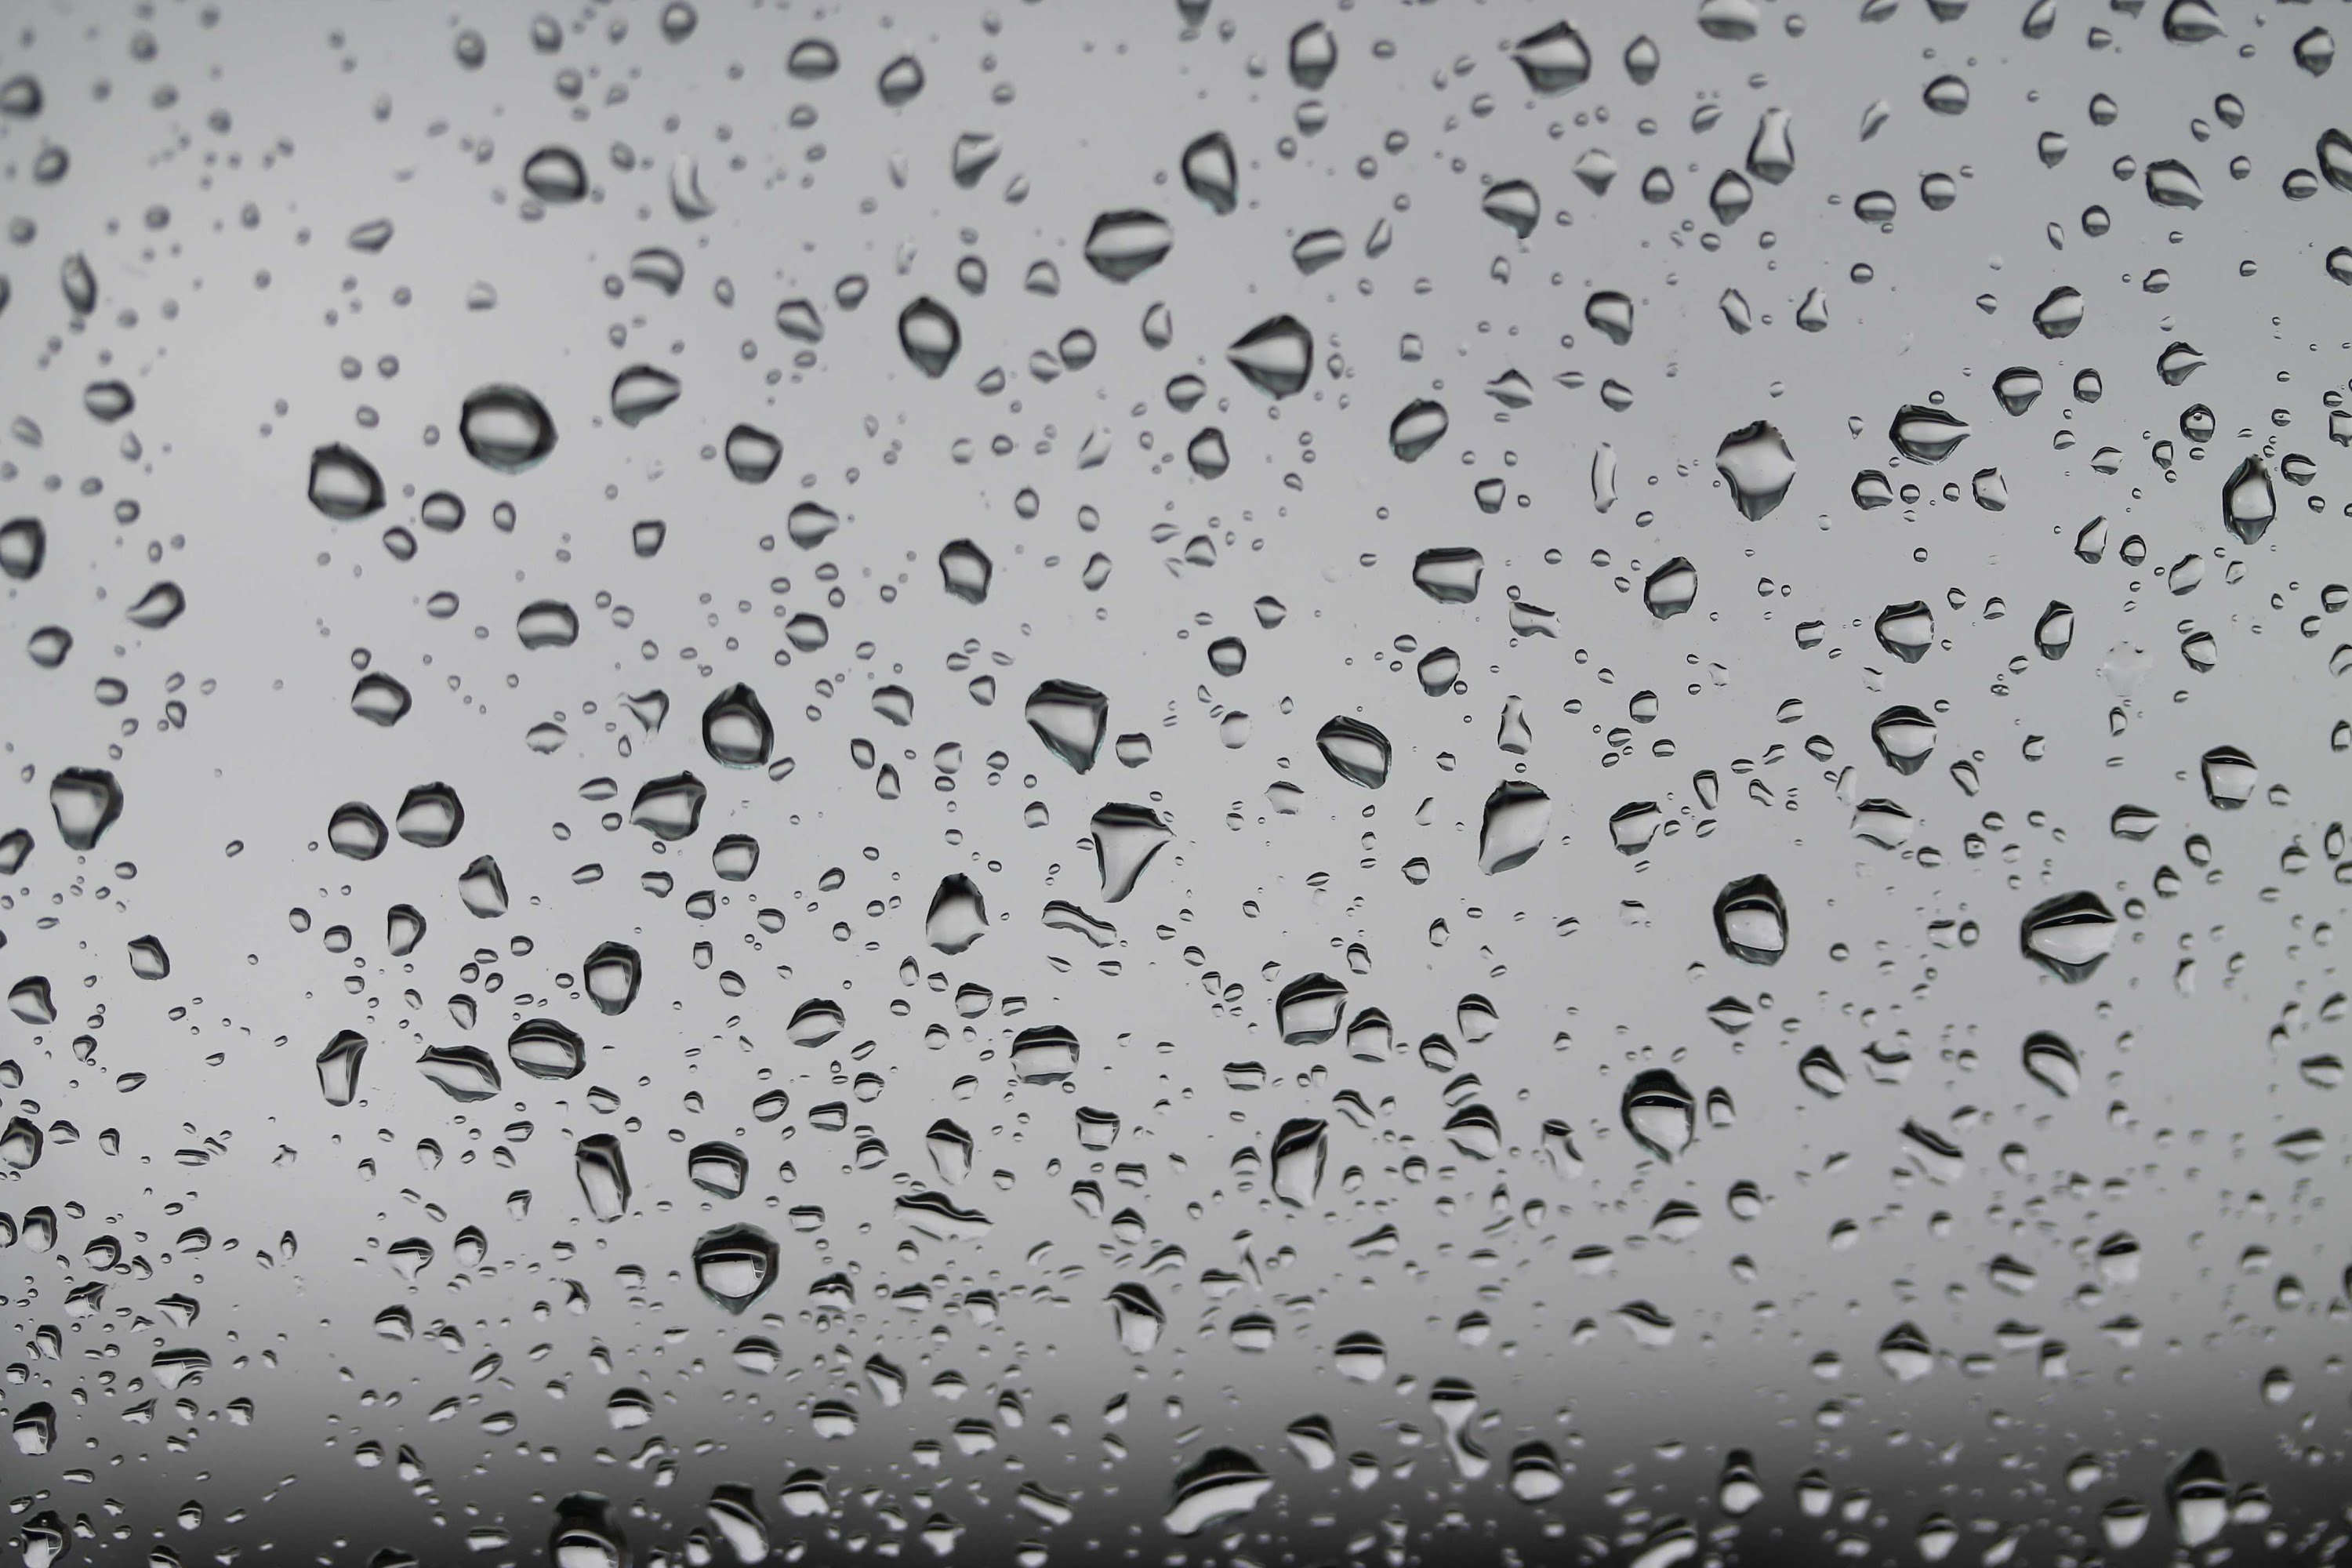 Raindrops Pics, Photography Collection